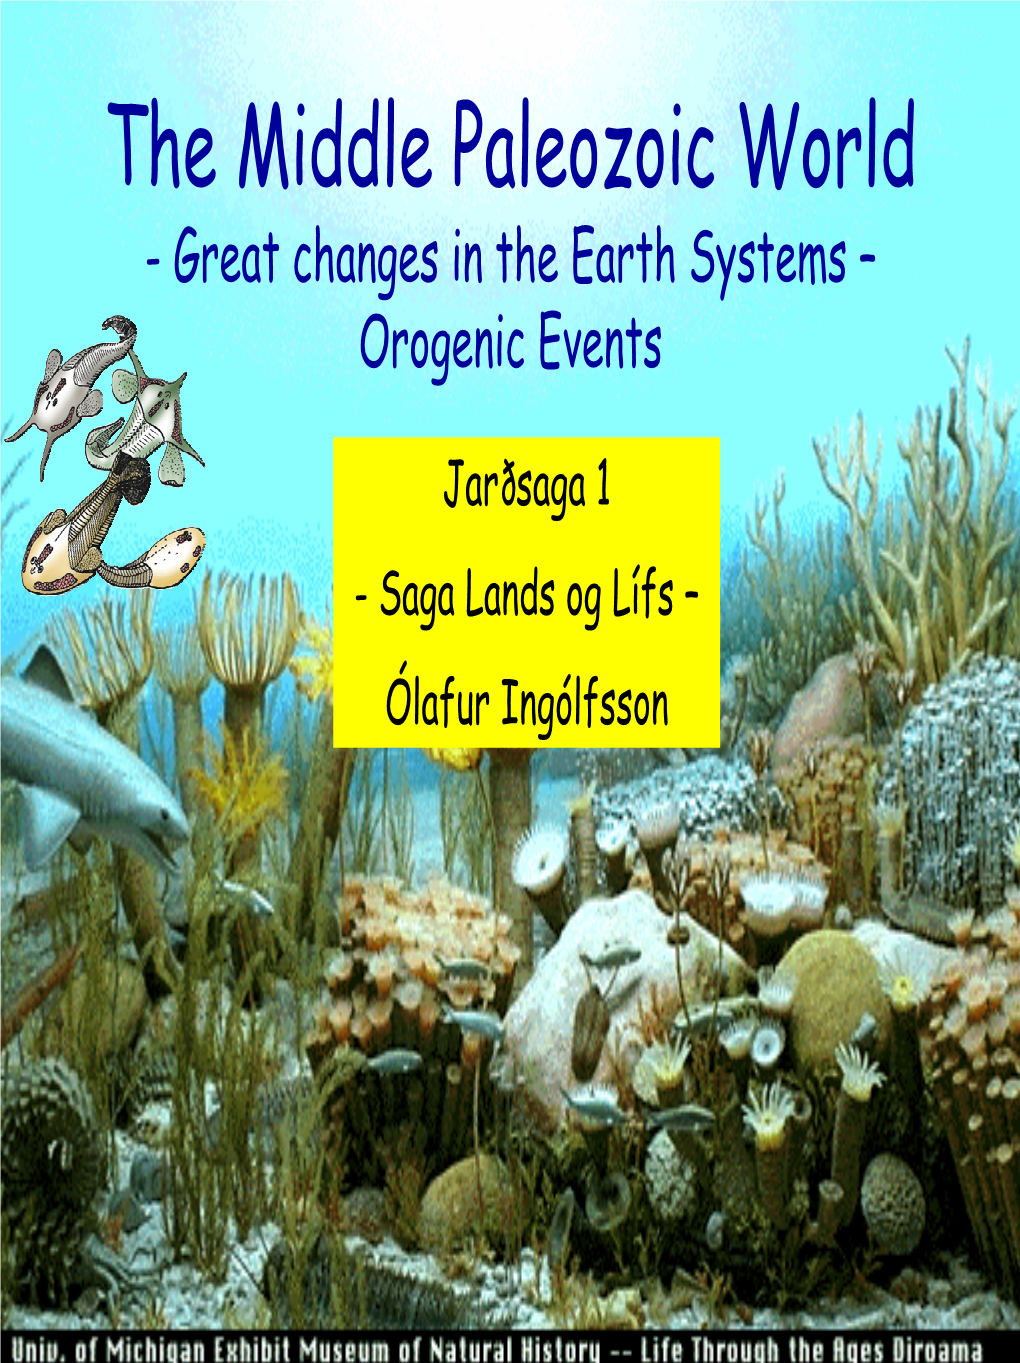 The Middle Paleozoic World - Great Changes in the Earth Systems – Orogenic Events